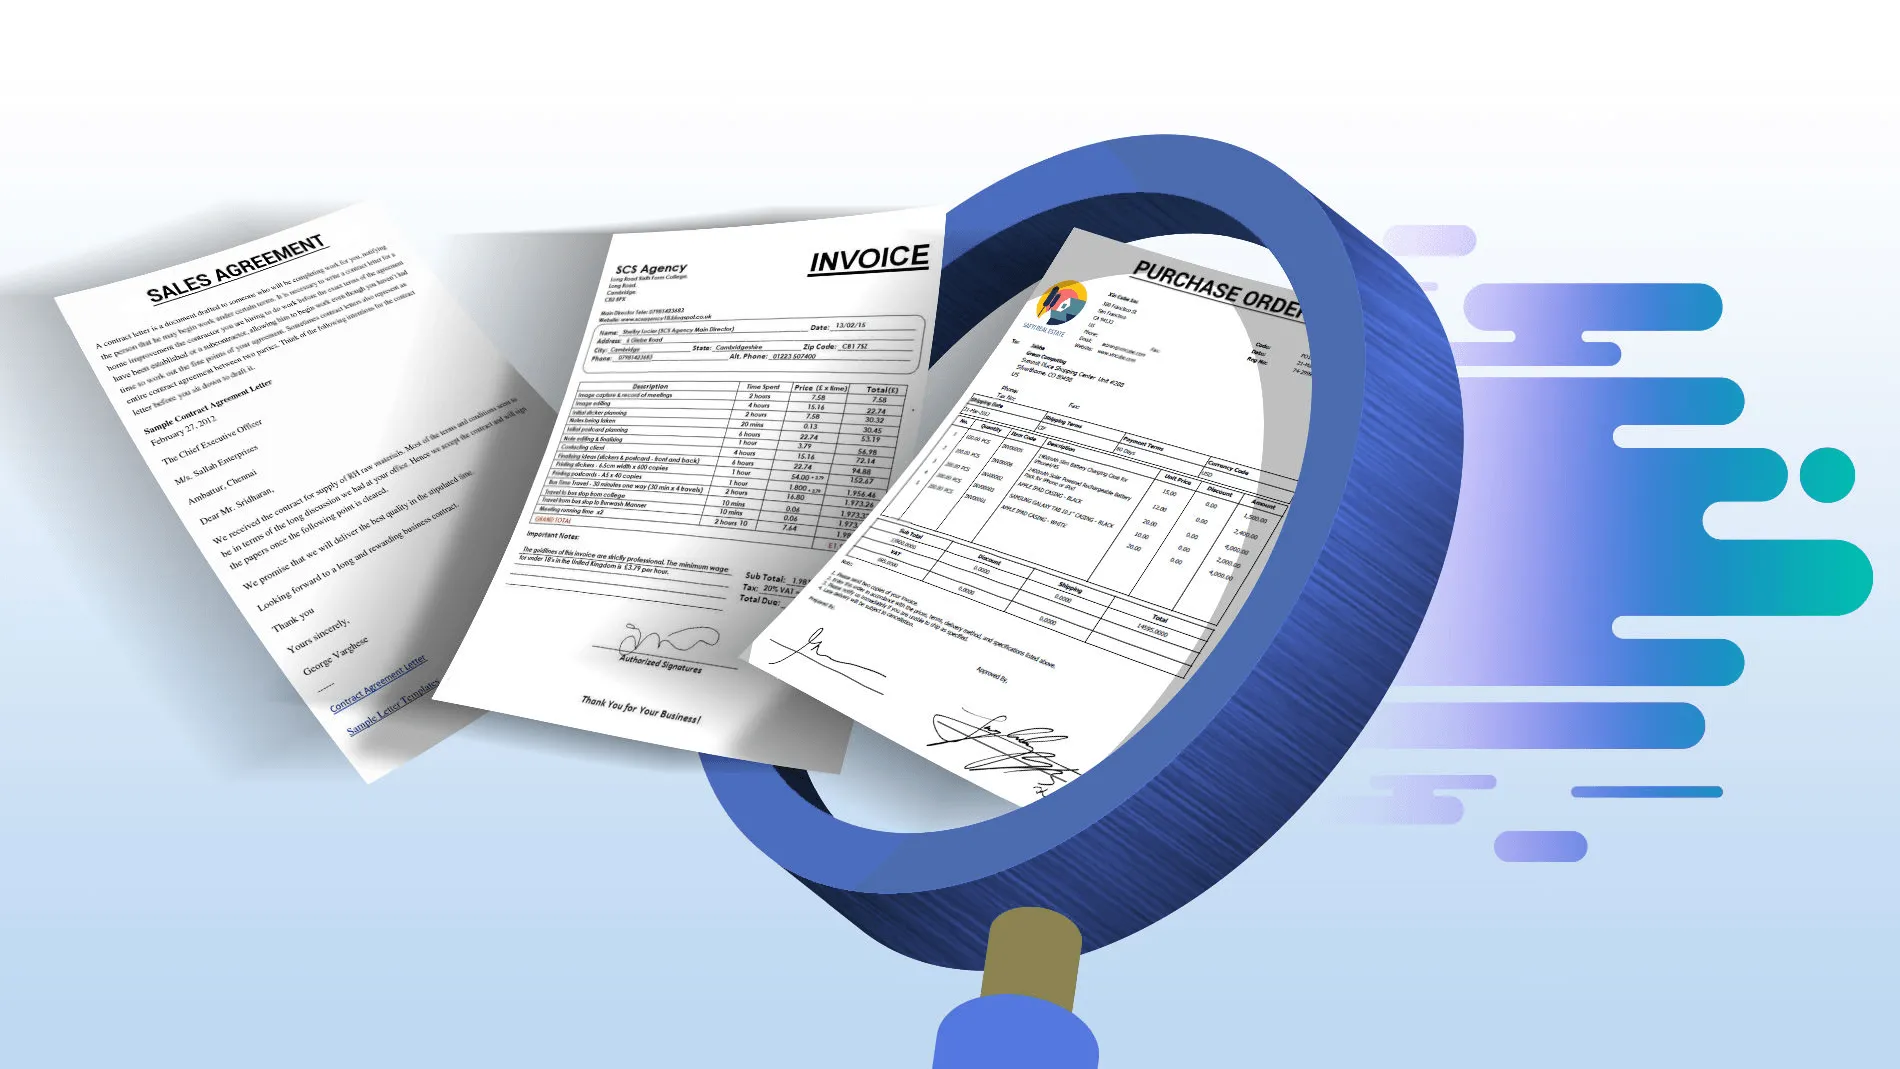 What are non-cash payment documents